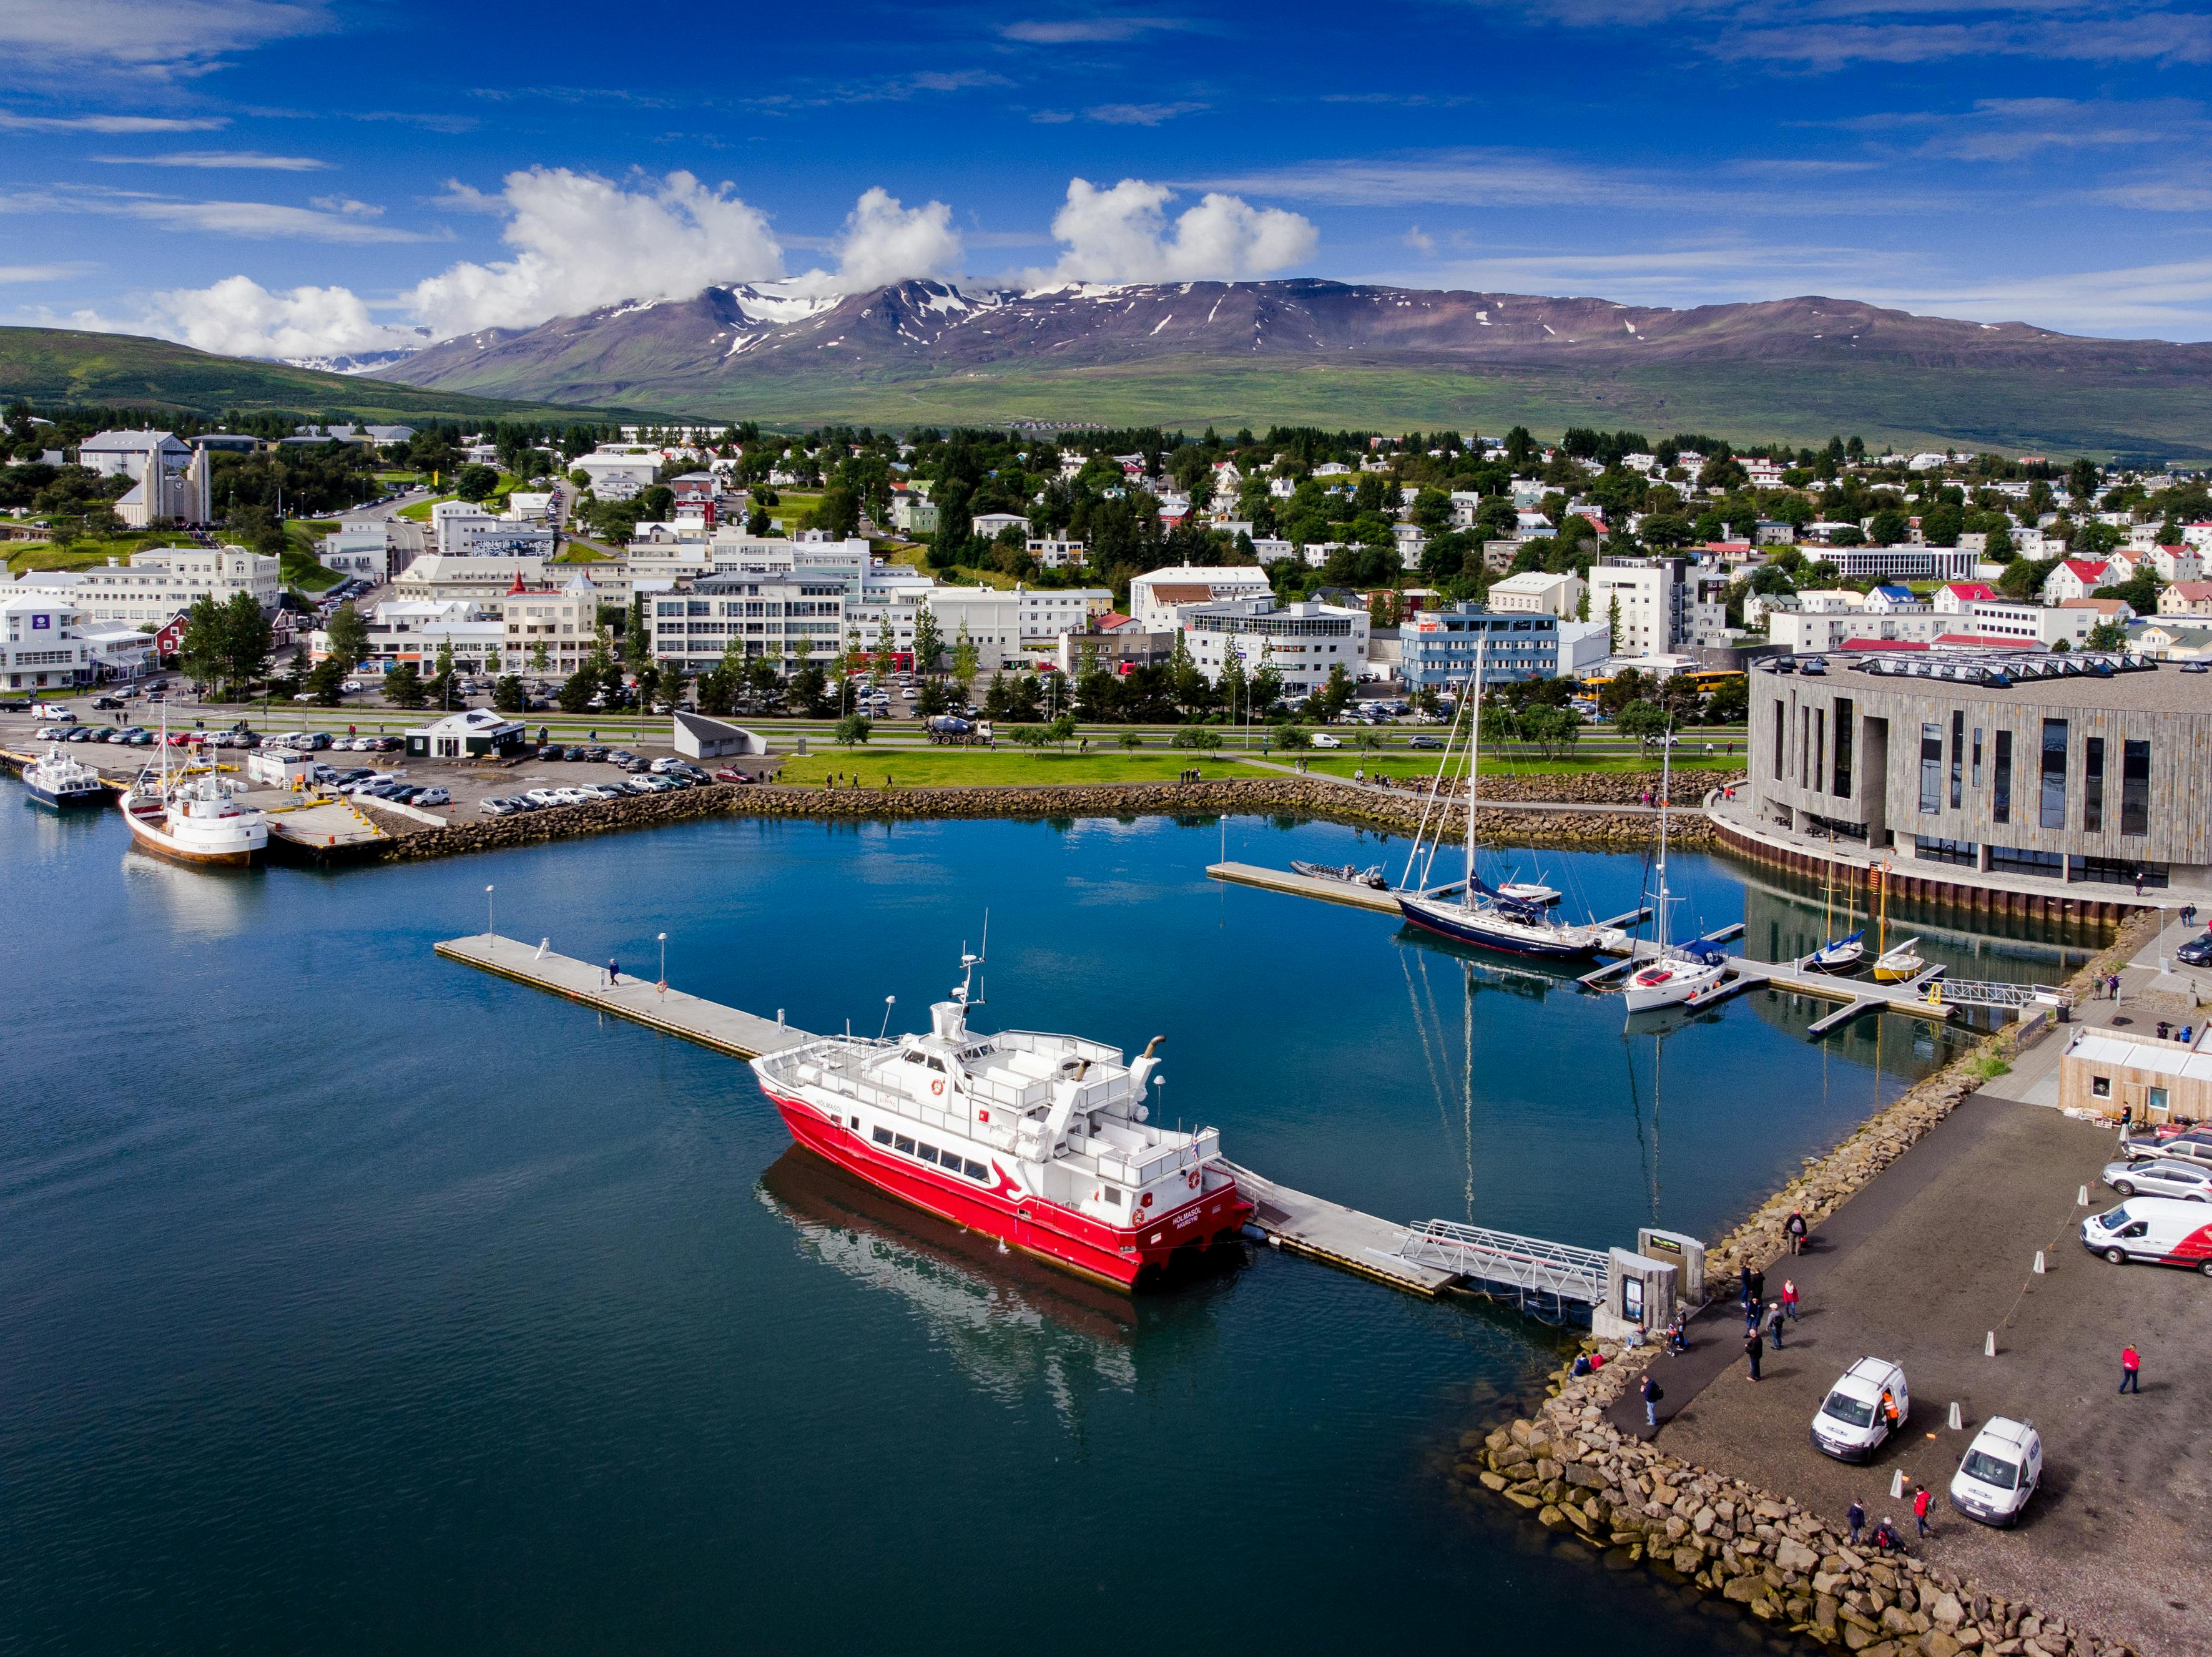 plan your own iceland trip